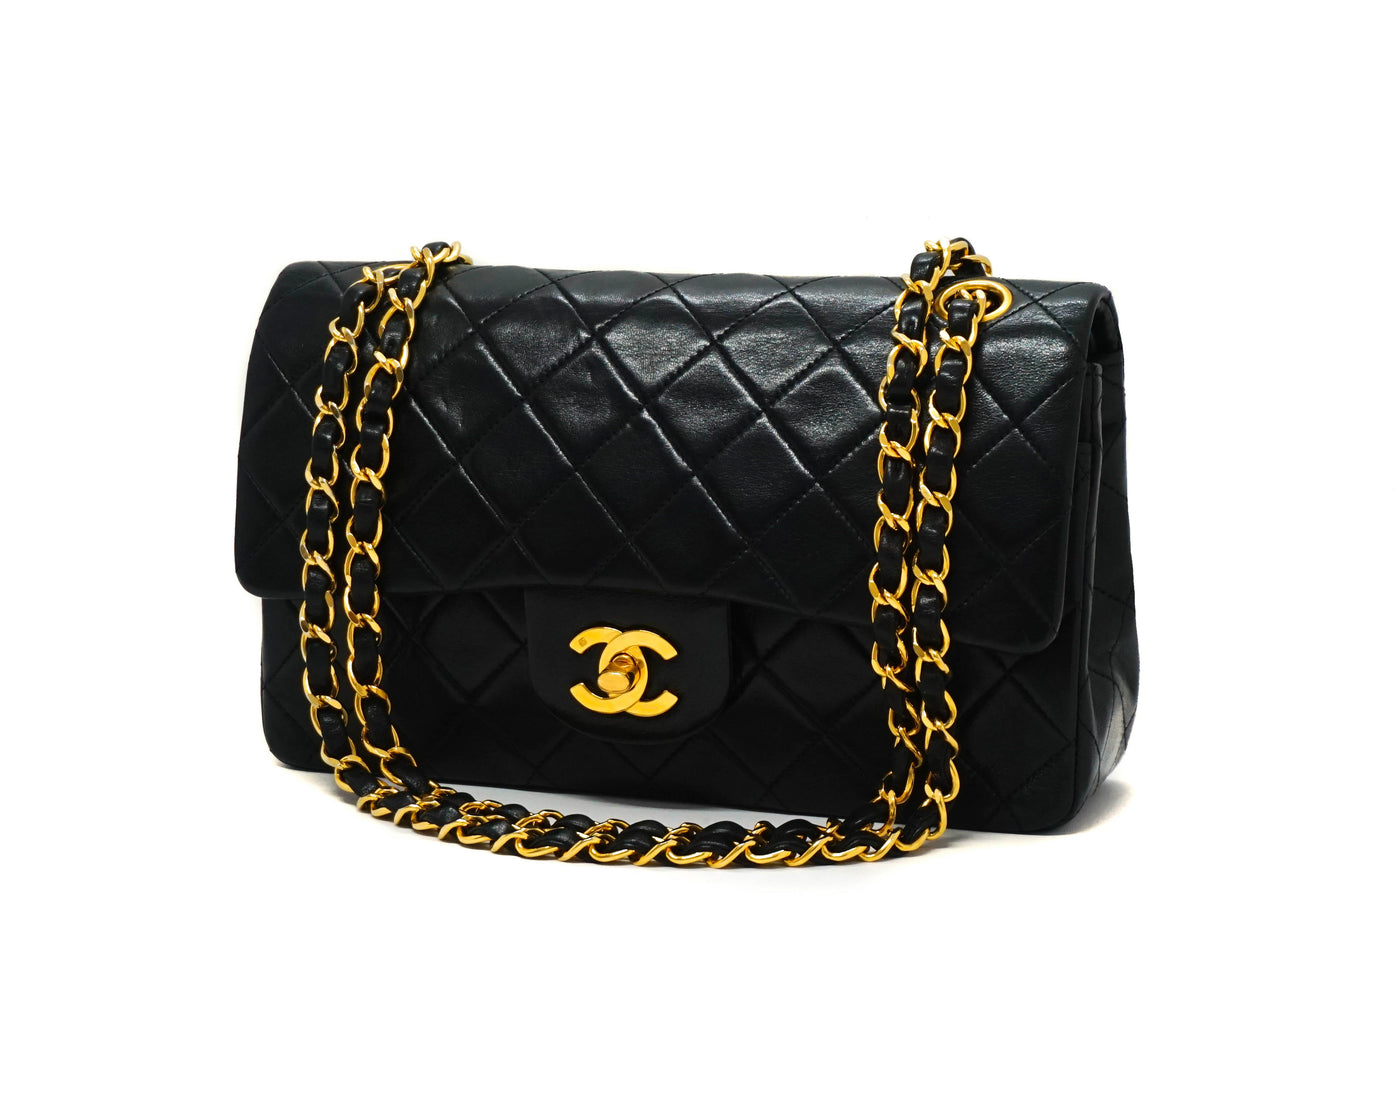 Vintage CHANEL Classic Black Quilted Lambskin Small Single Flap Bag 